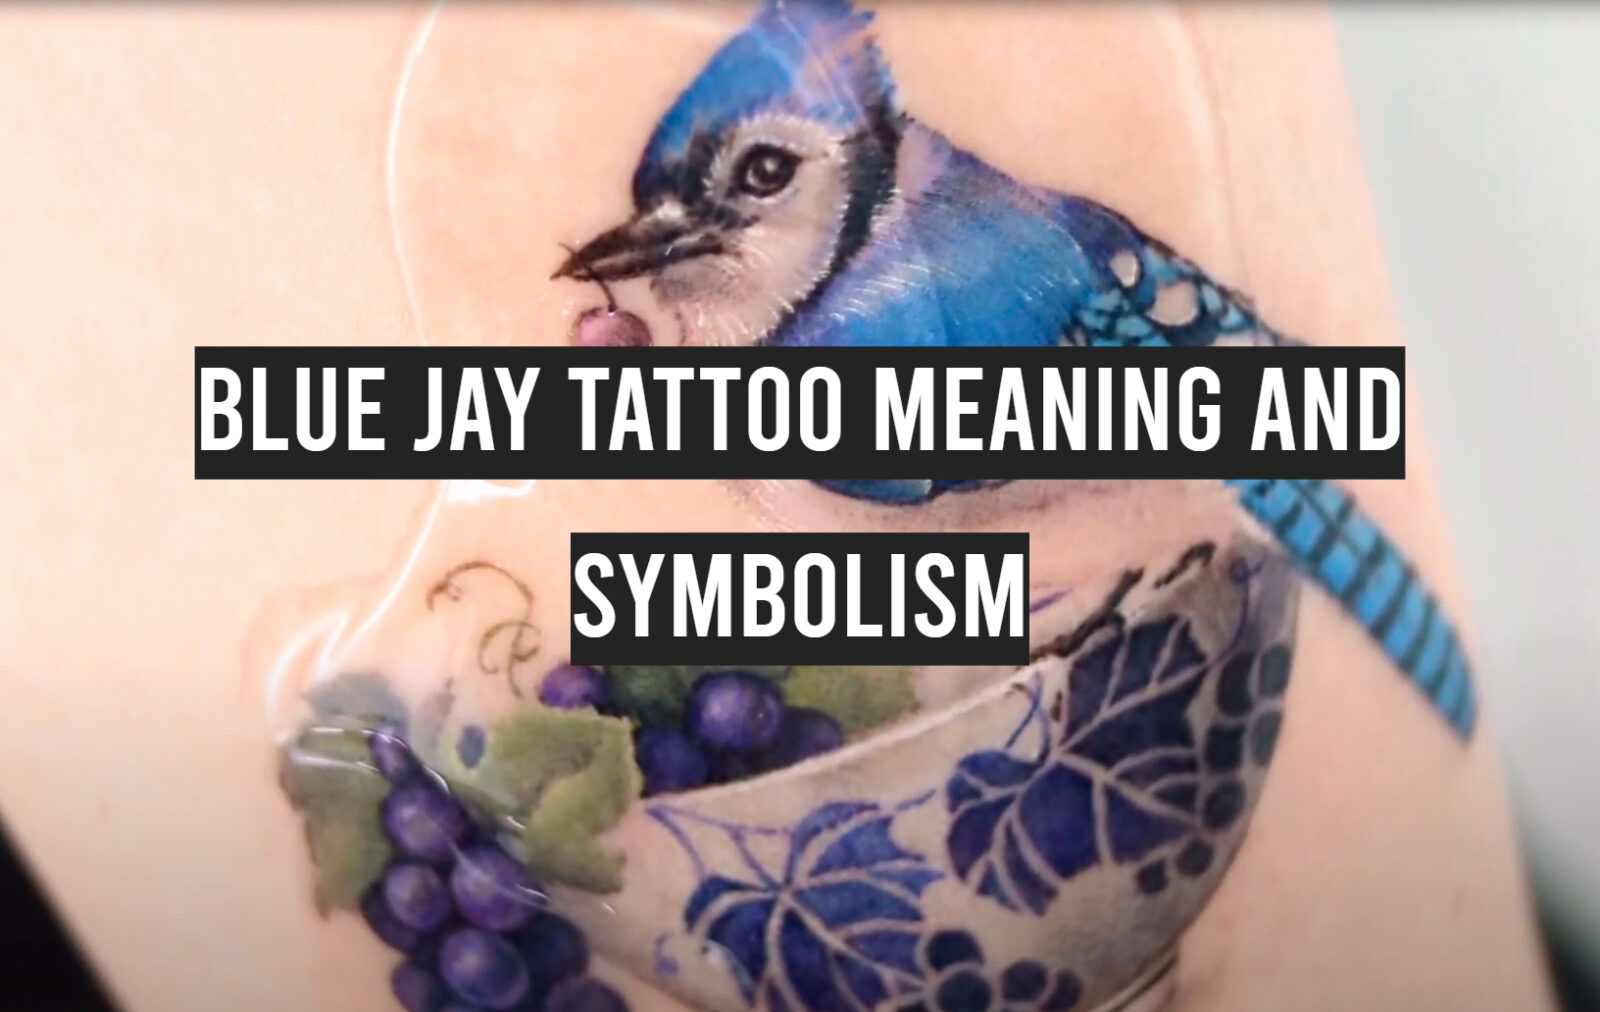 Blue Jay Tattoo Meaning and Symbolism